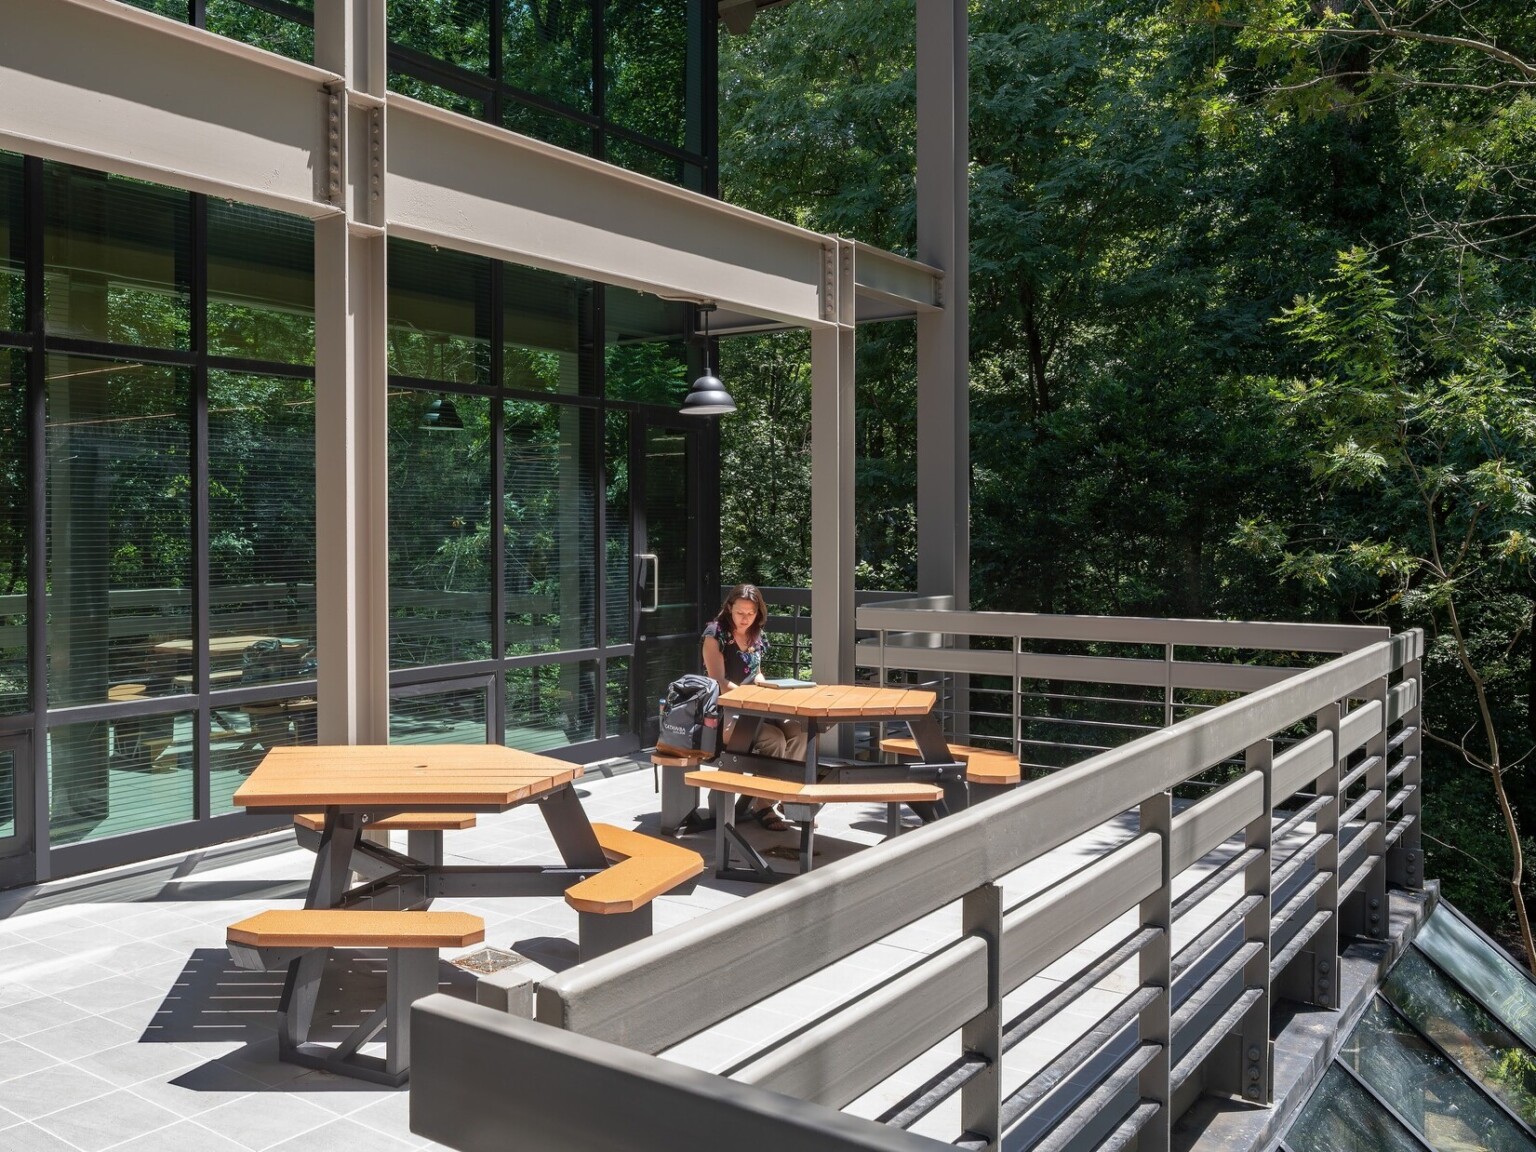 Glass building windows with brown beams and railings with picnic tables surrounded by nature